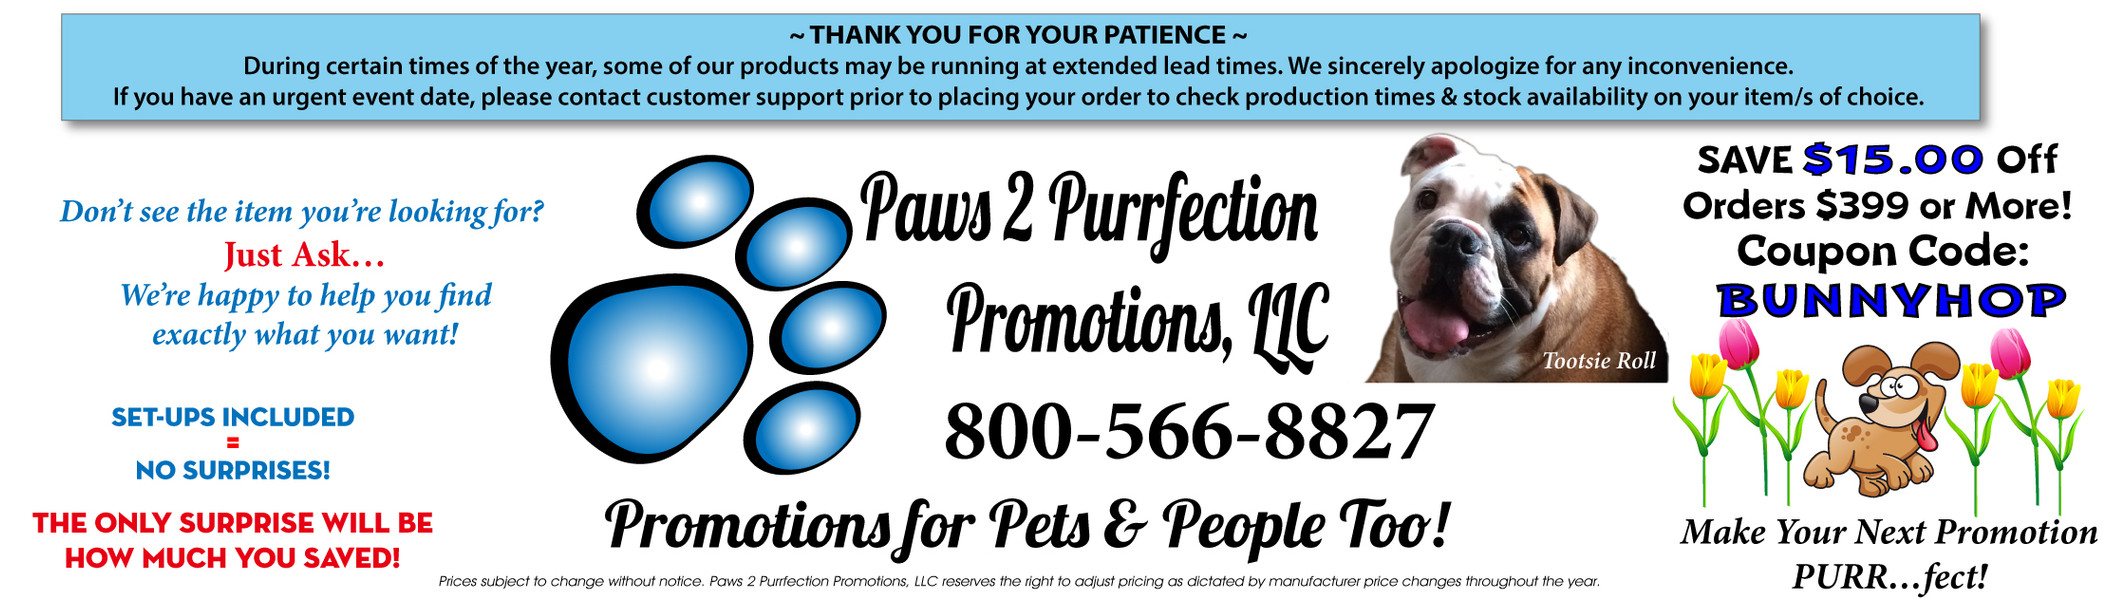 Paws 2 Purrfection Promotions, LLC